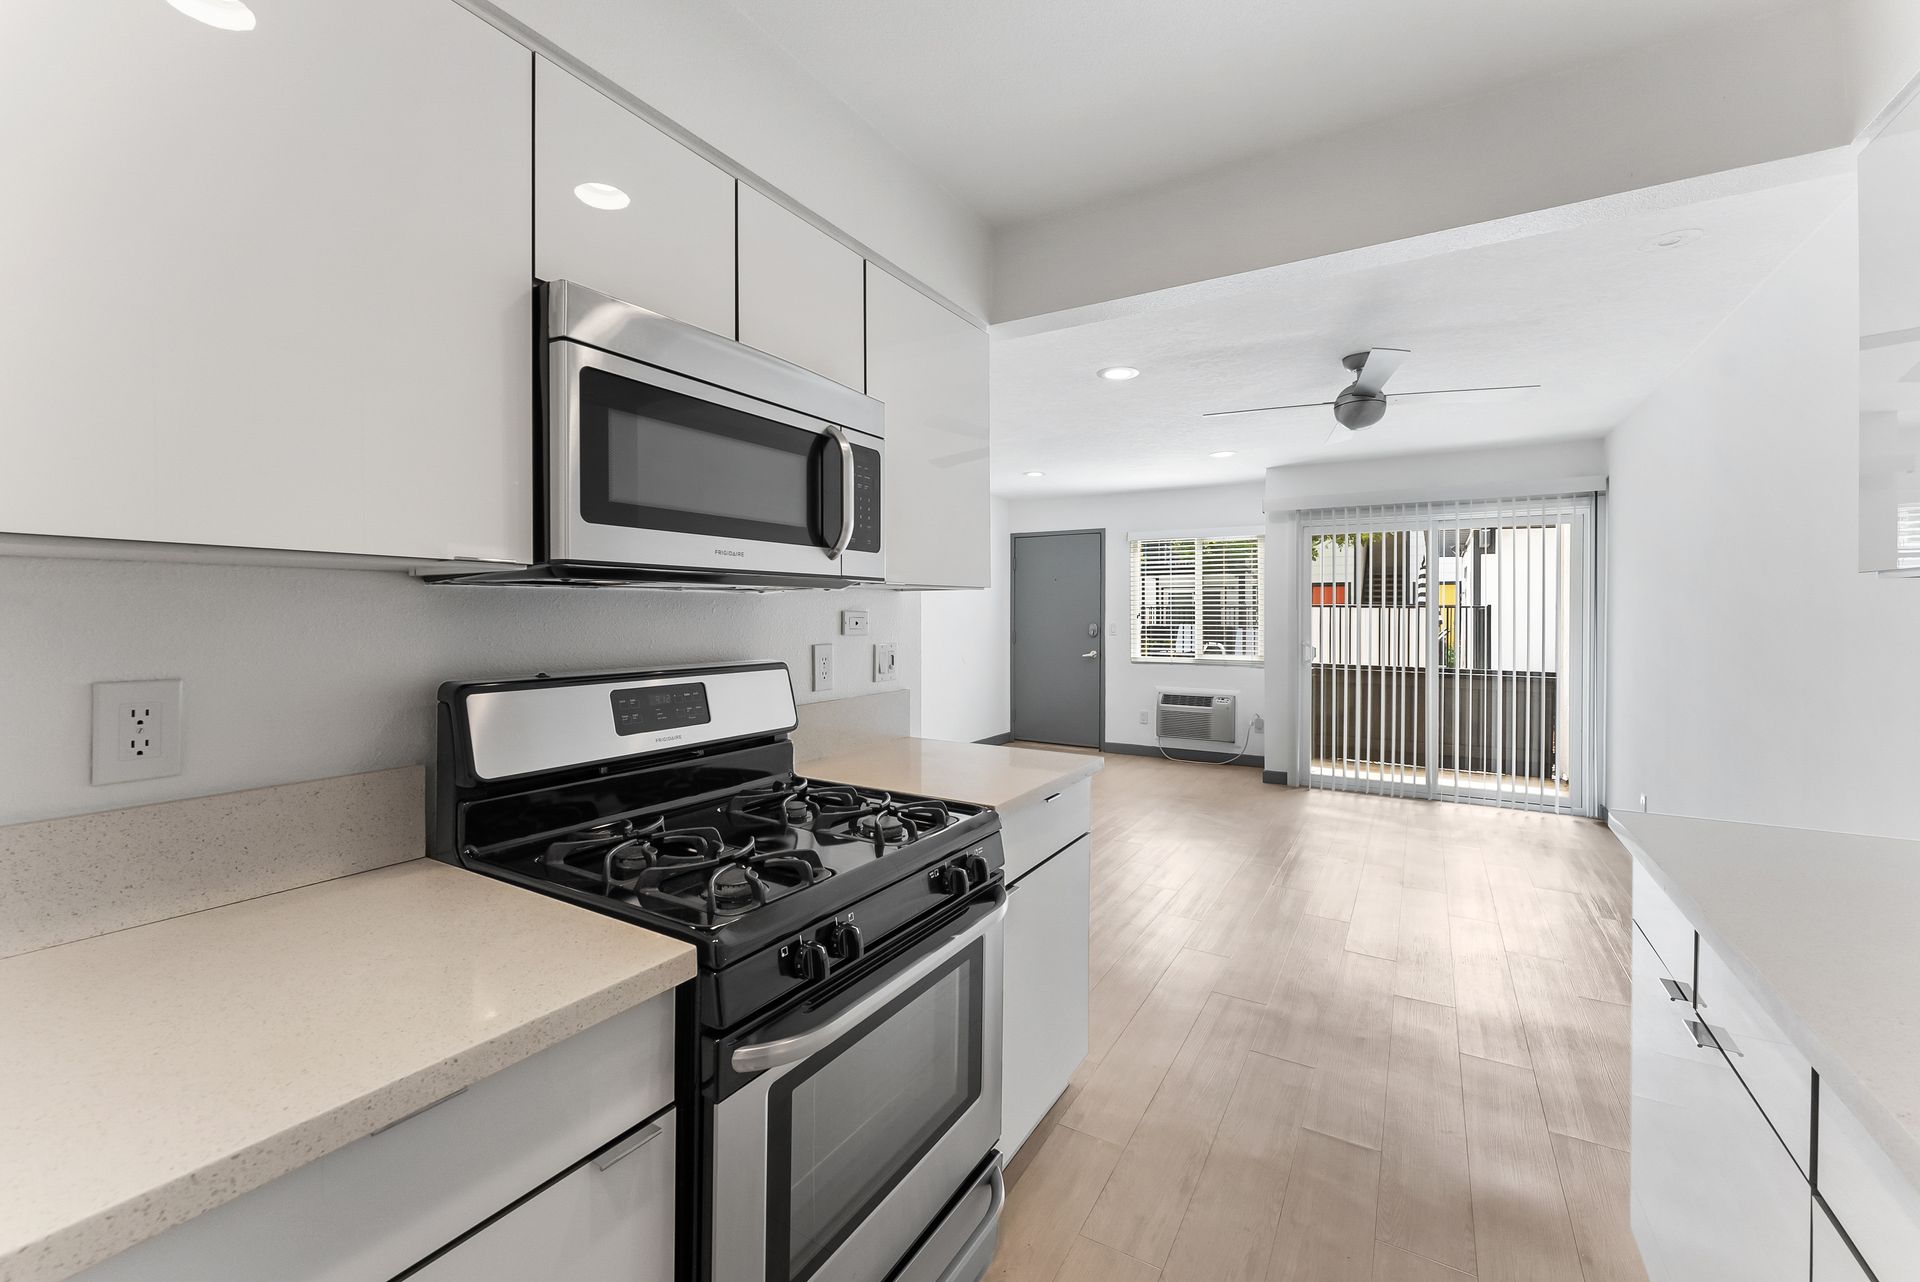 Sliding Photo Gallery Displaying Apartment Features- Kitchen with black stove and sliding door to patio